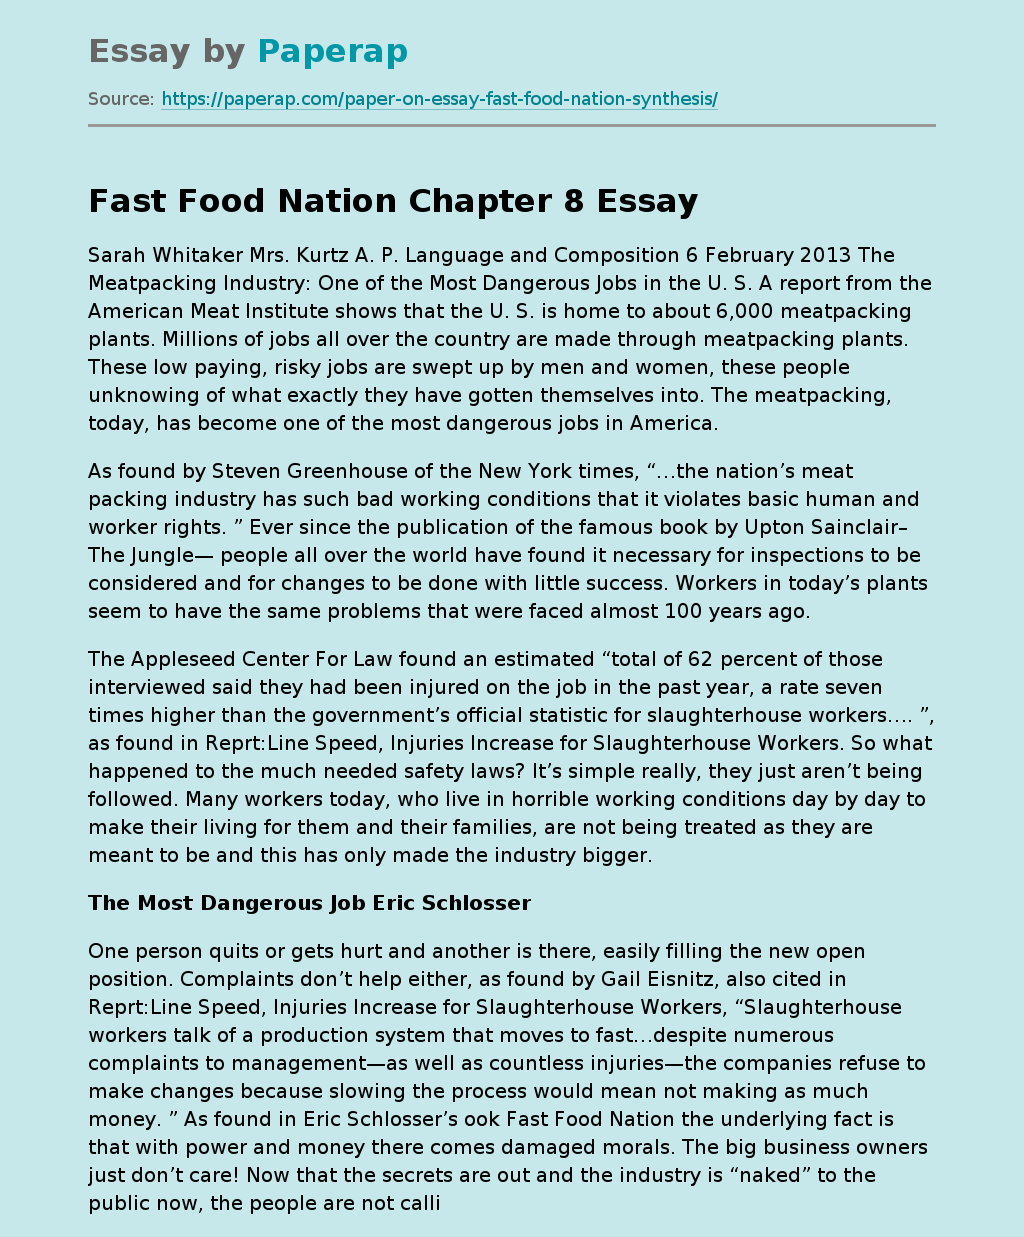 Fast Food Nation Chapter 8